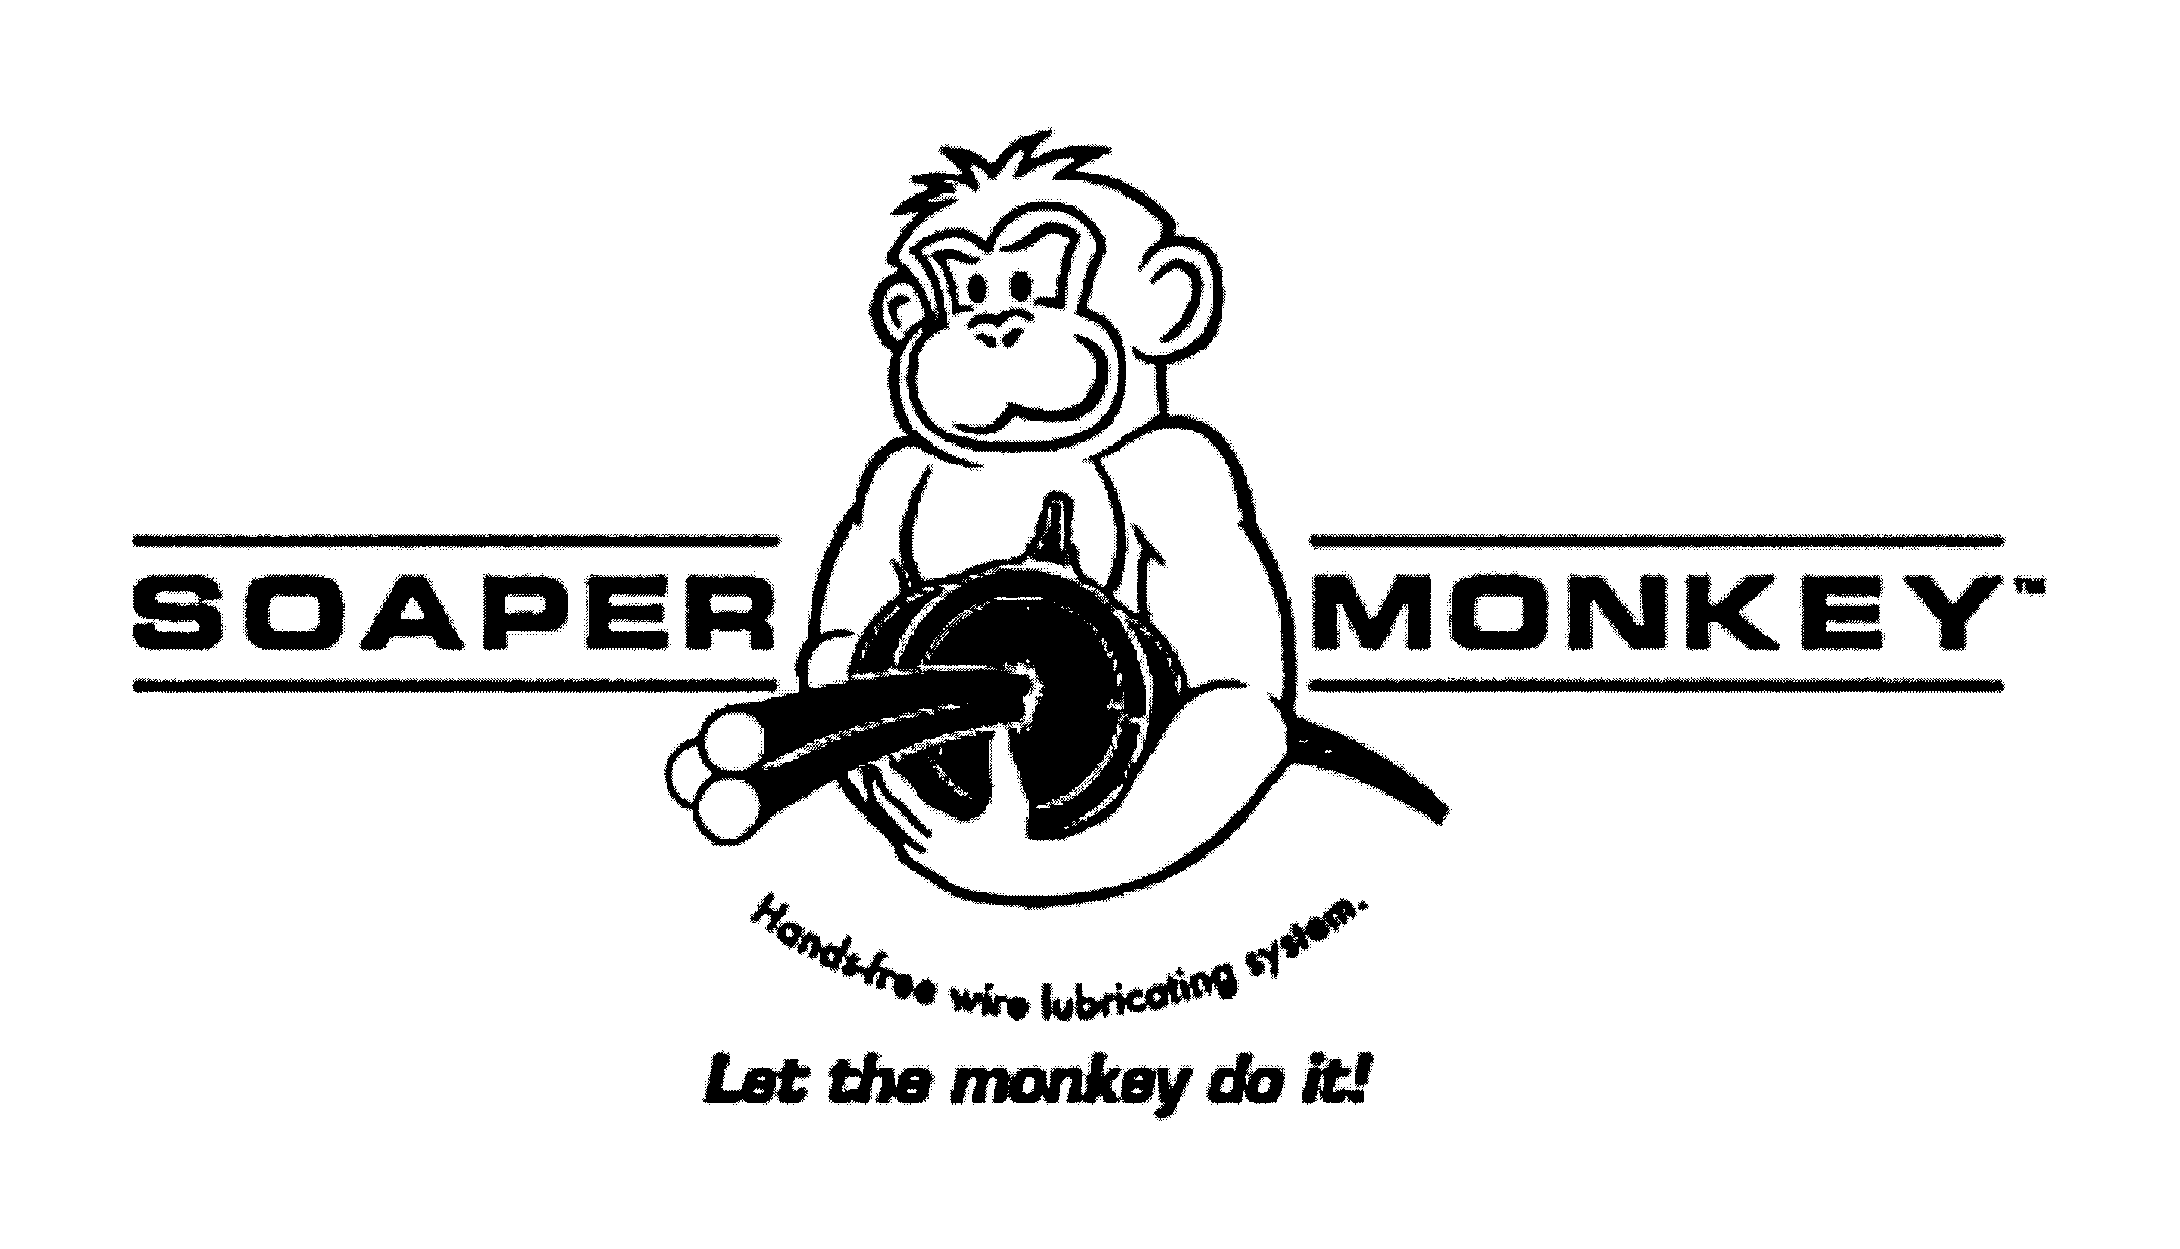  SOAPER MONKEY HANDS-FREE WIRE LUBRICATING SYSTEM. LET THE MONKEY DO IT!